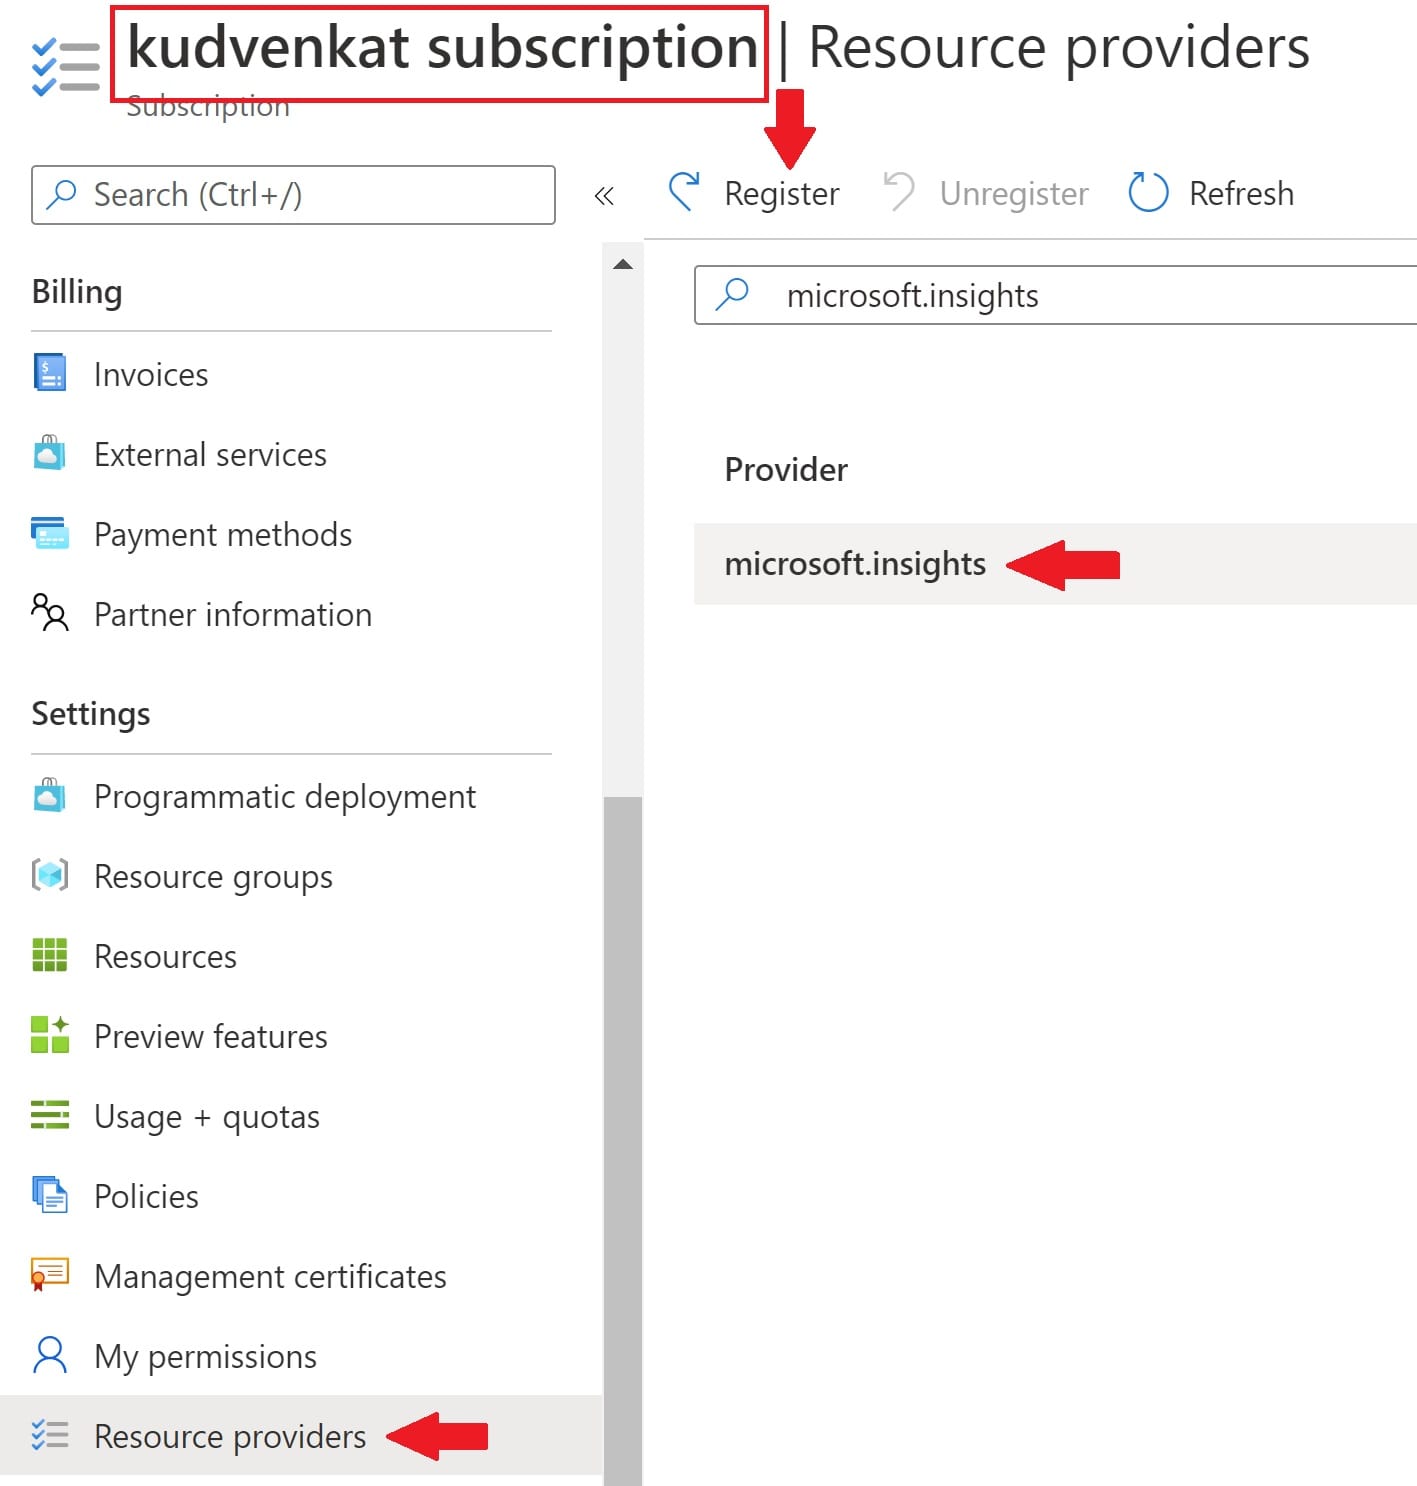 the subscription is not registered to use namespace 'microsoft.insights'